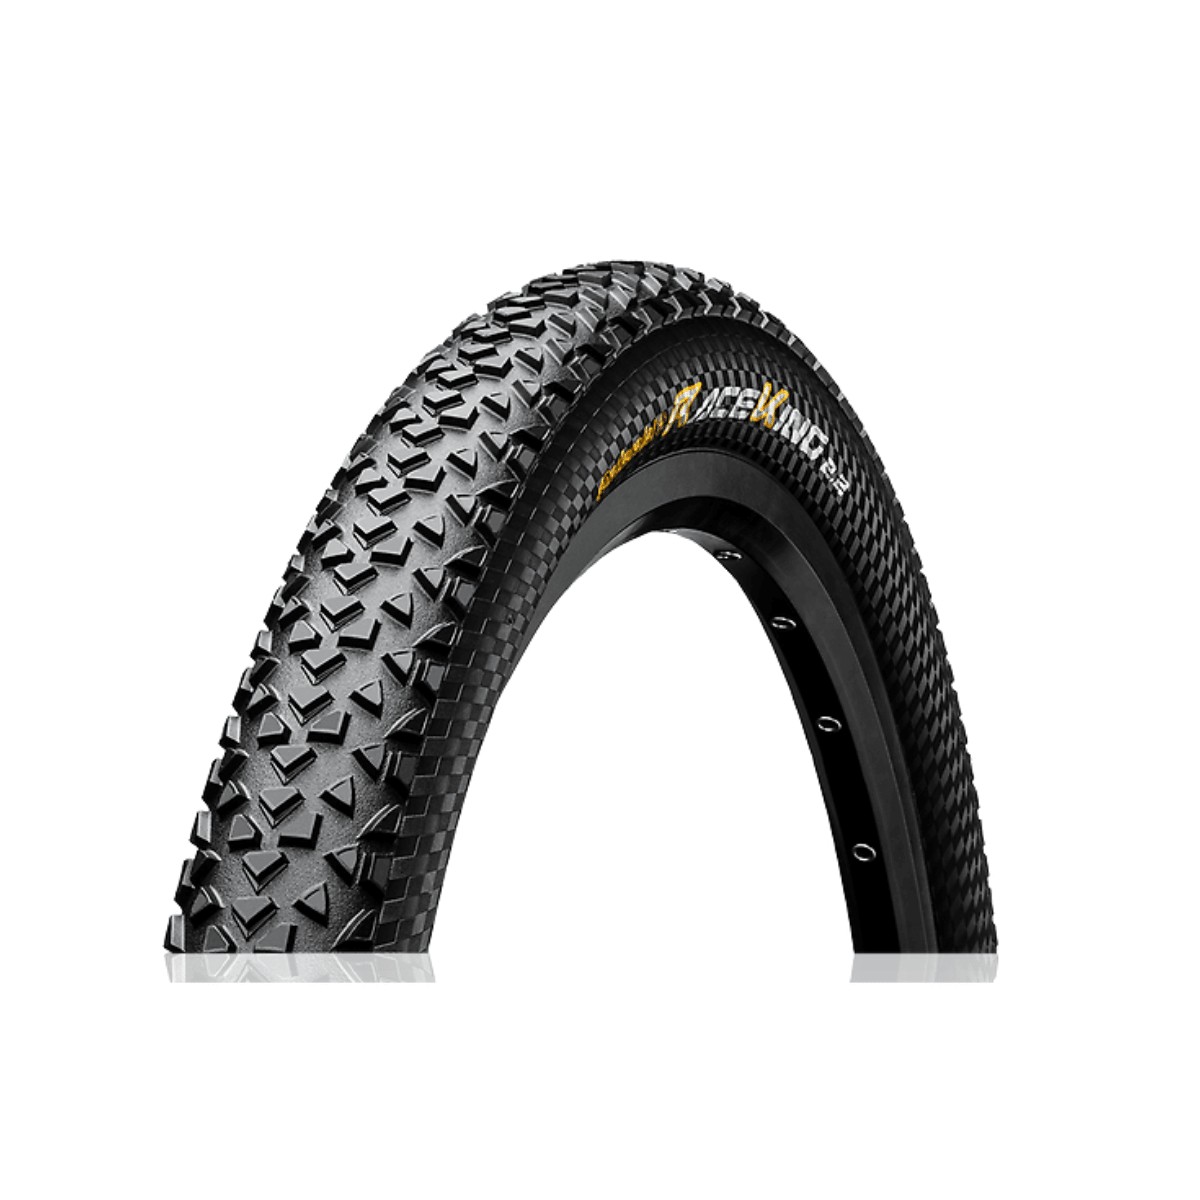 Protection 5 günstig Kaufen-Continental Race King Protection 26, 27'5 oder 29 x 2.20 Tubeless Ready Reifen, Größe 27.5"x2.20. Continental Race King Protection 26, 27'5 oder 29 x 2.20 Tubeless Ready Reifen, Größe 27.5"x2.20 <![CDATA[Hauptmerkmale Continent